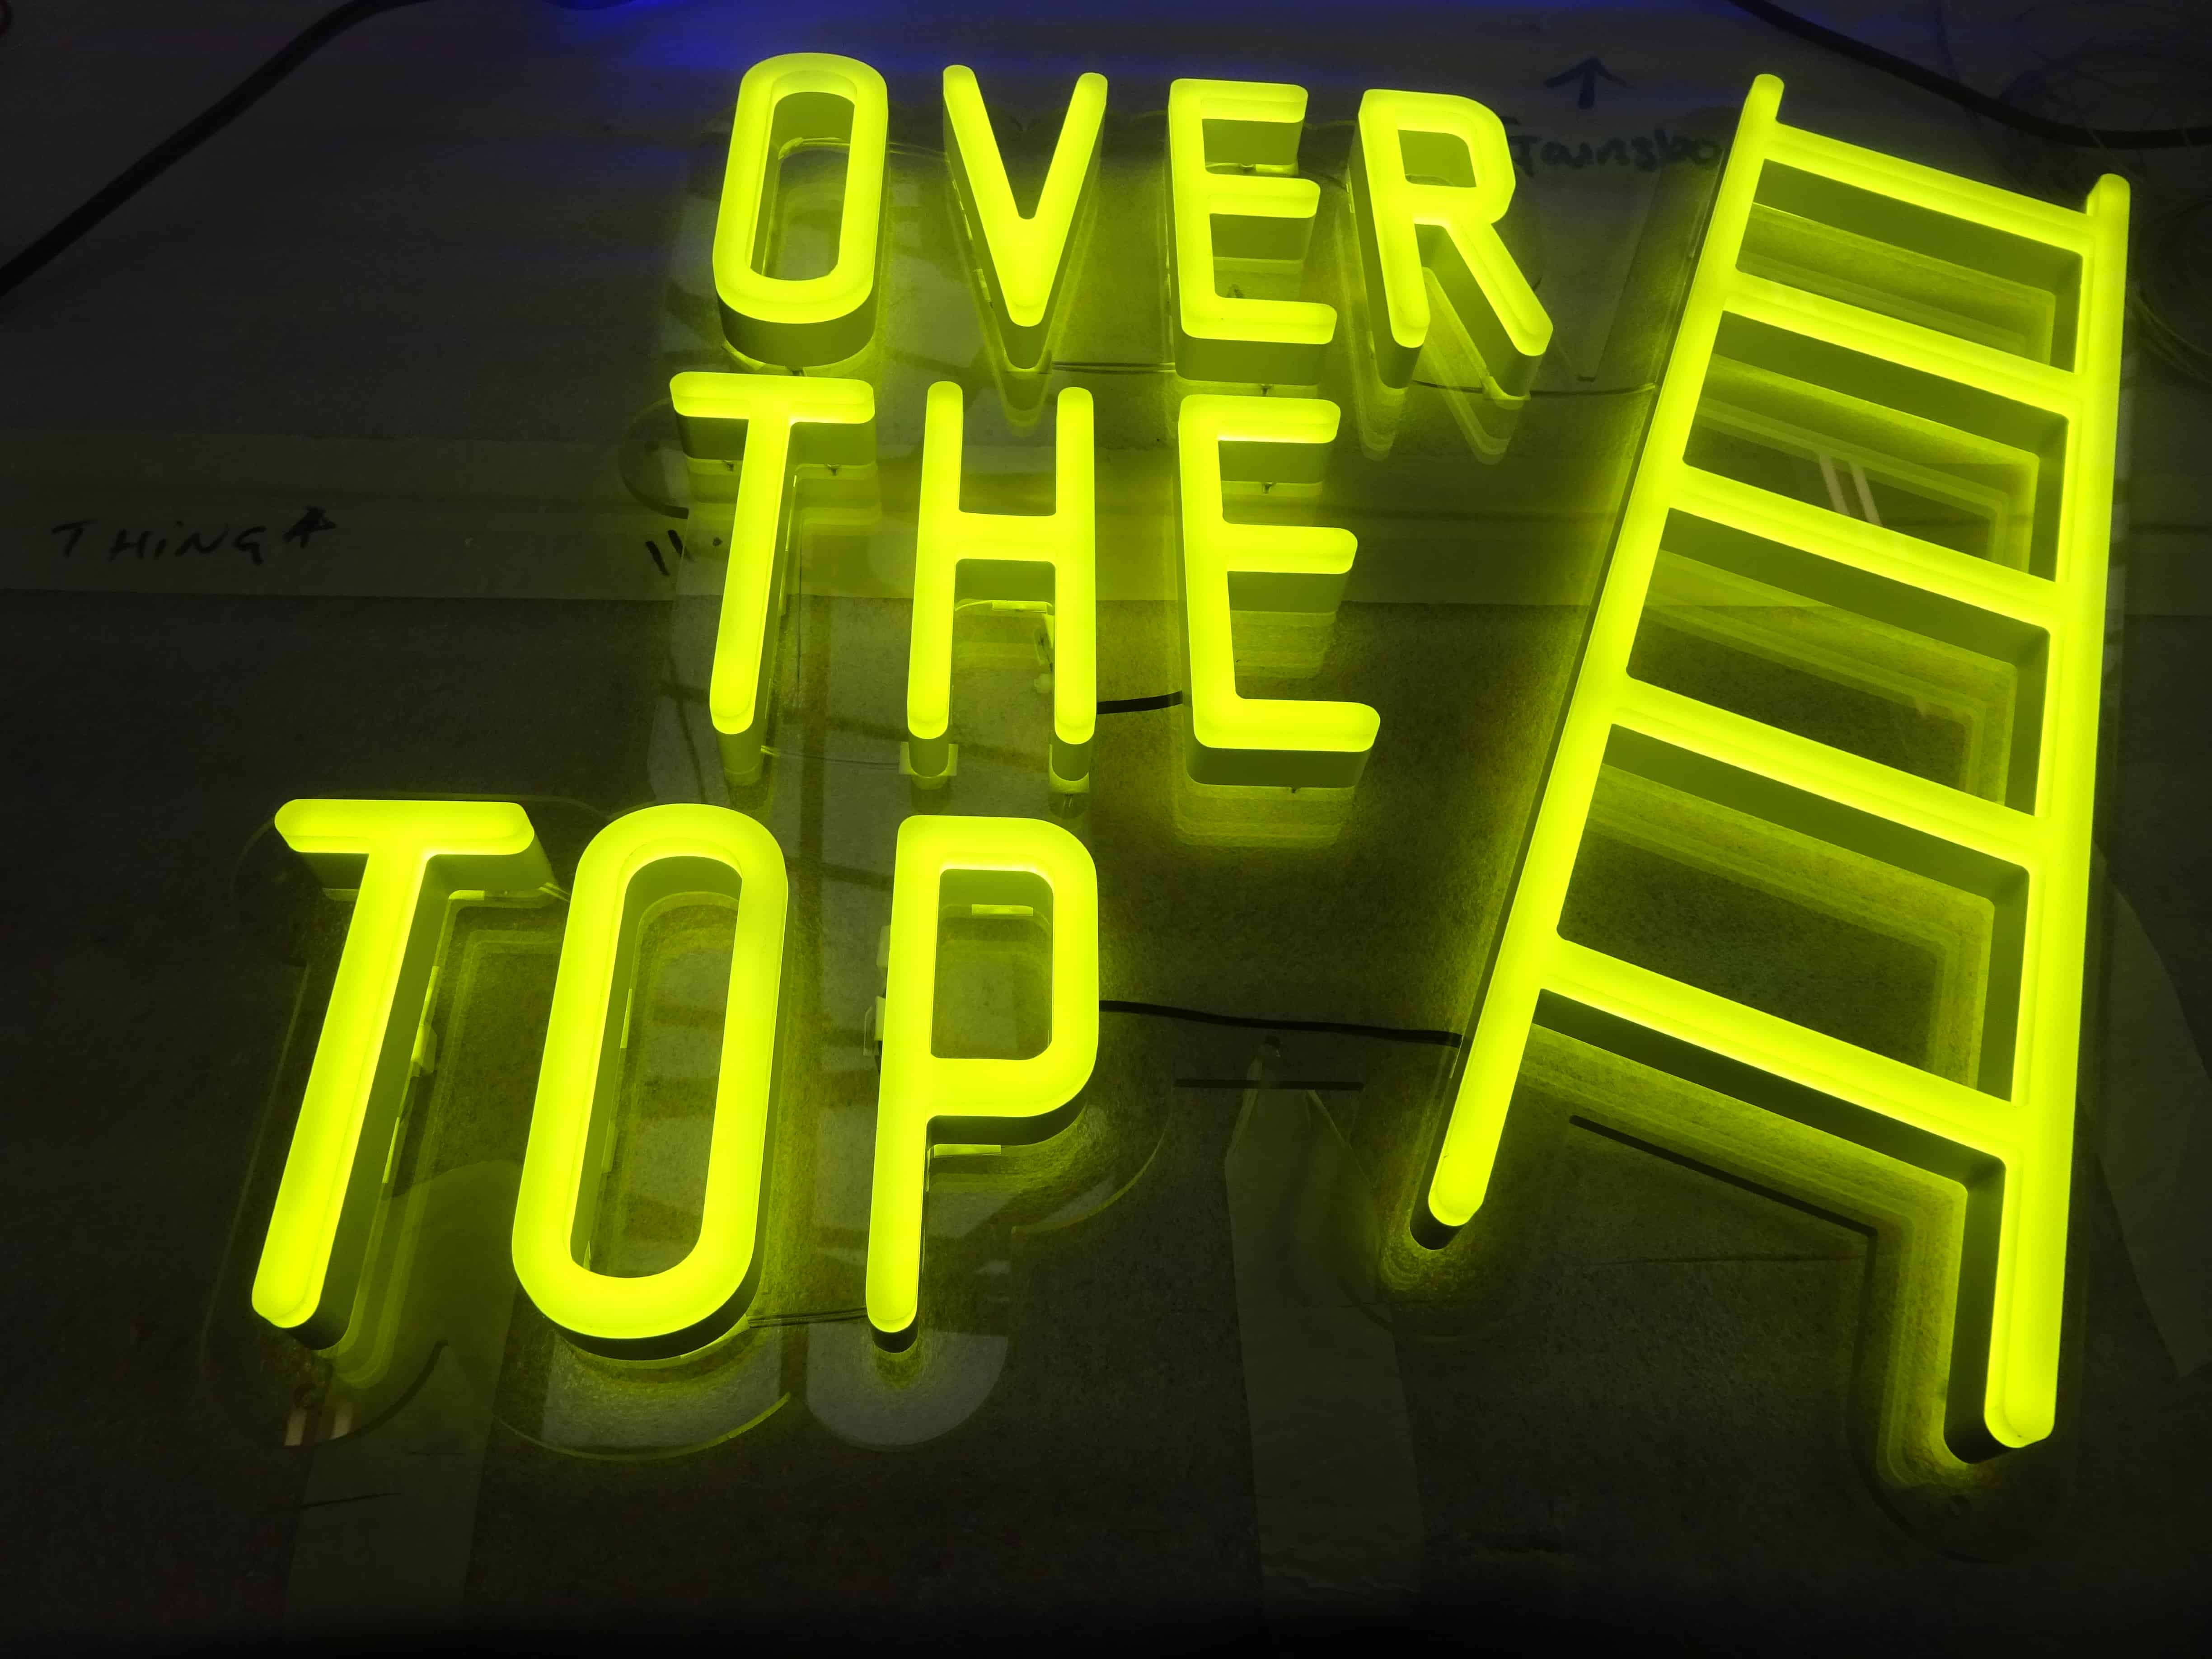 Yellow ladder neon sign alternative with eco-friendly LED lighting and illuminated text.